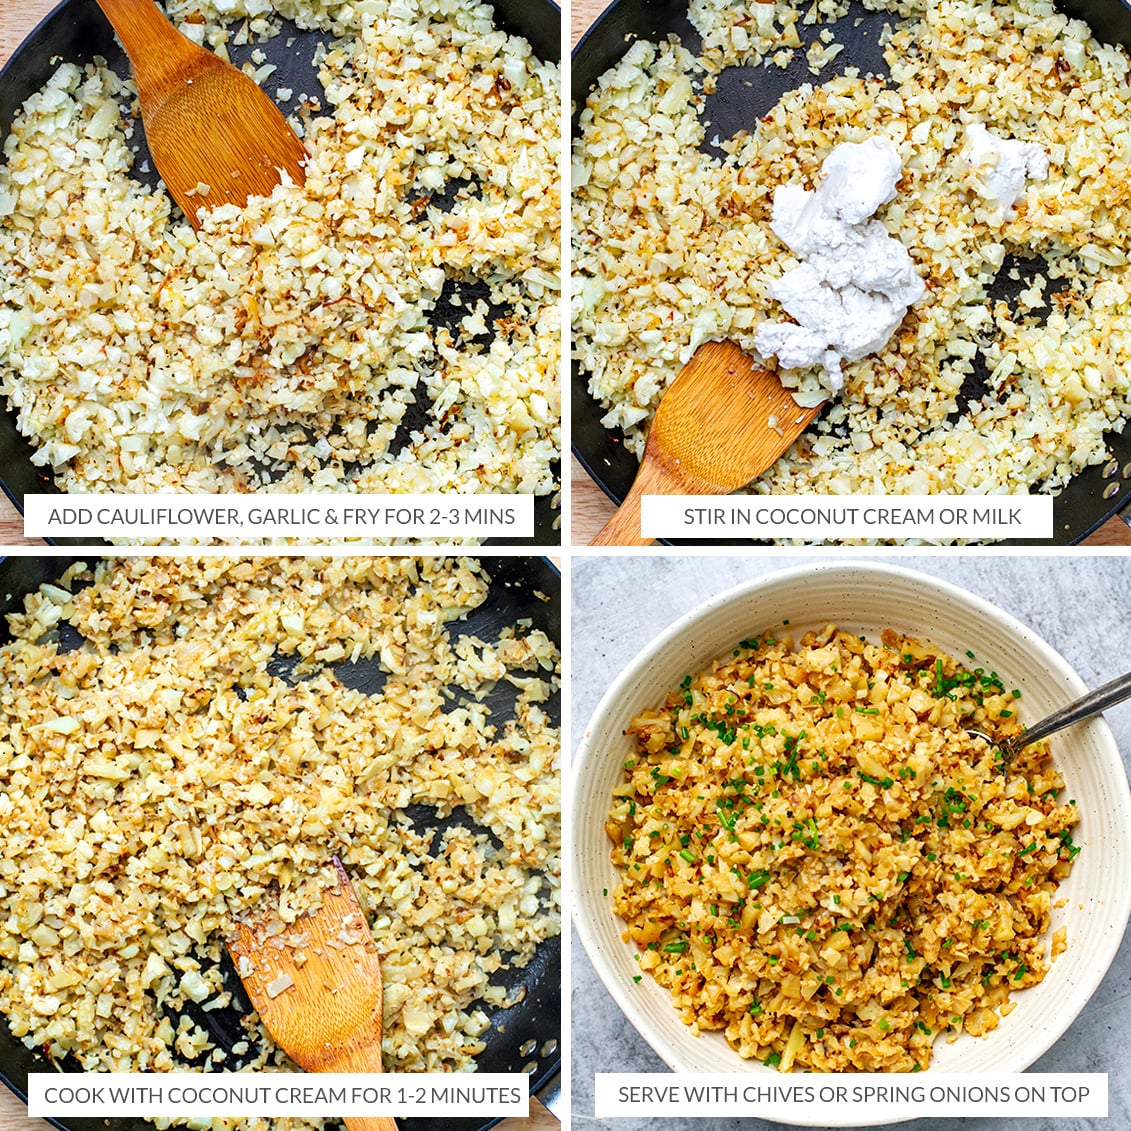 How to cook cauliflower rice in a frying pan